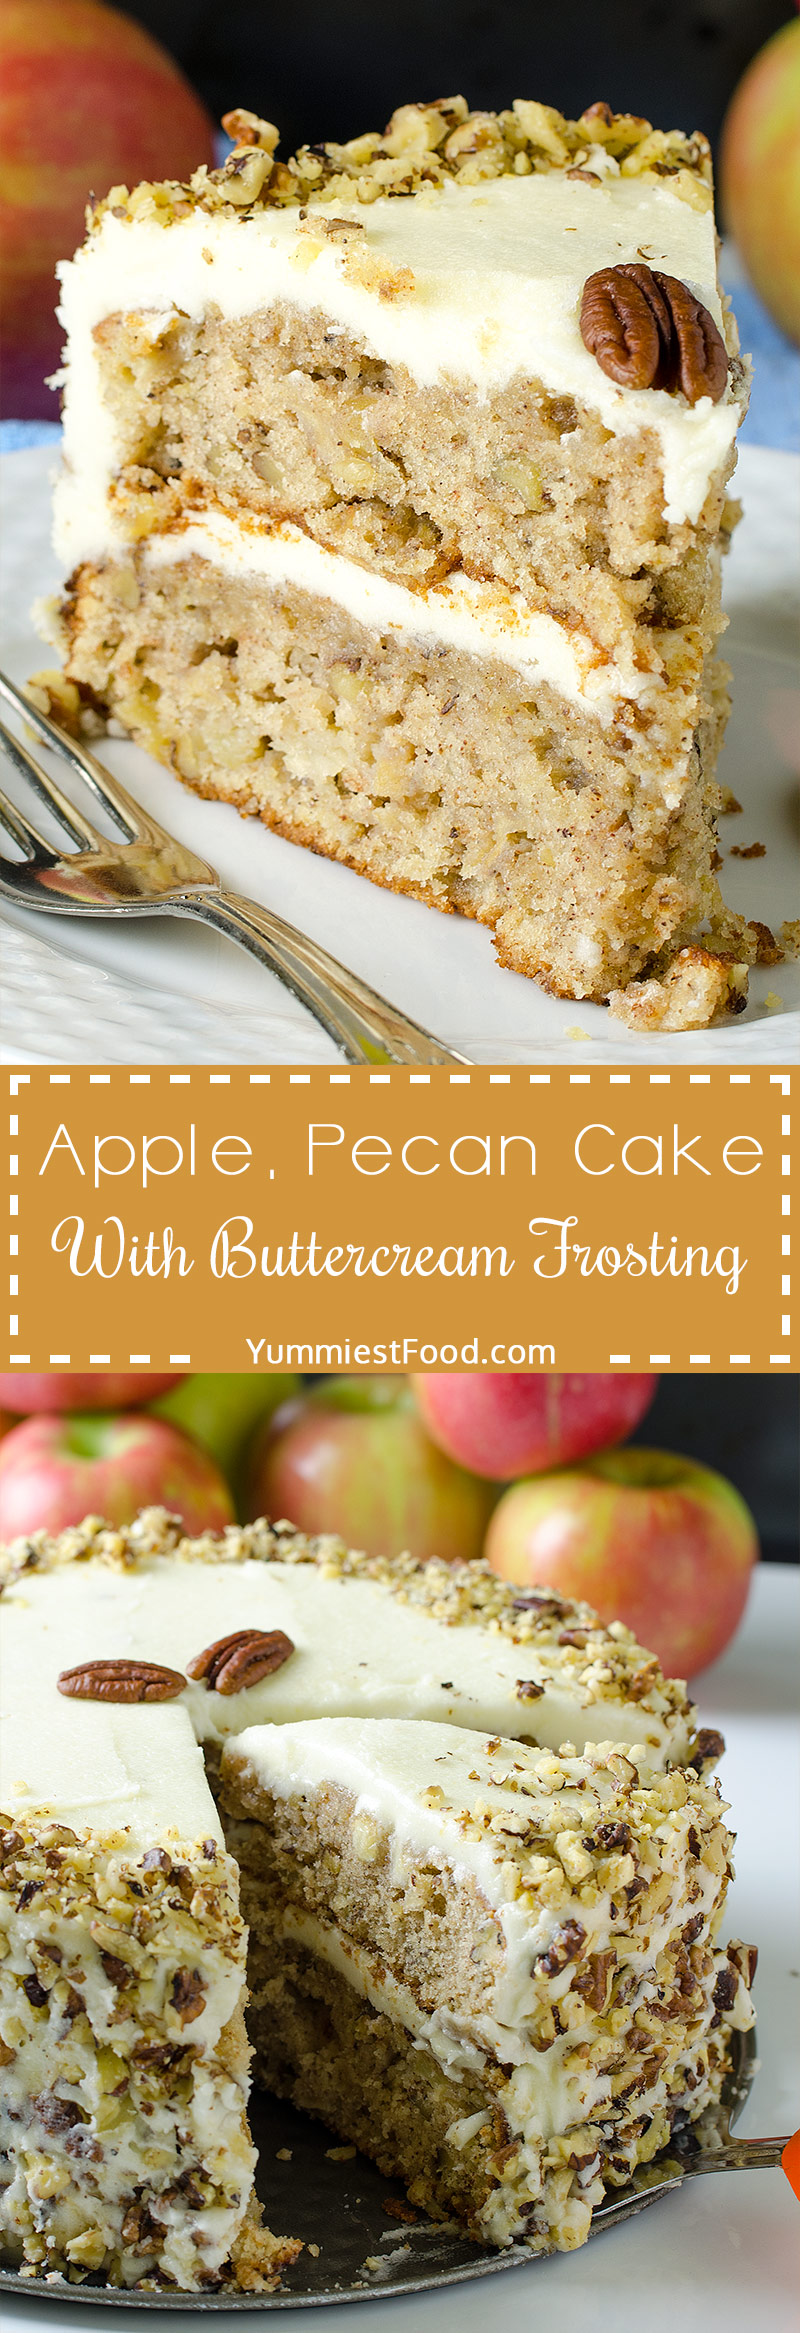 APPLE, PECAN CAKE WITH BUTTERCREAM FROSTING - Easy layer cake is fall treat with chopped apples, pecans and buttercream frosting